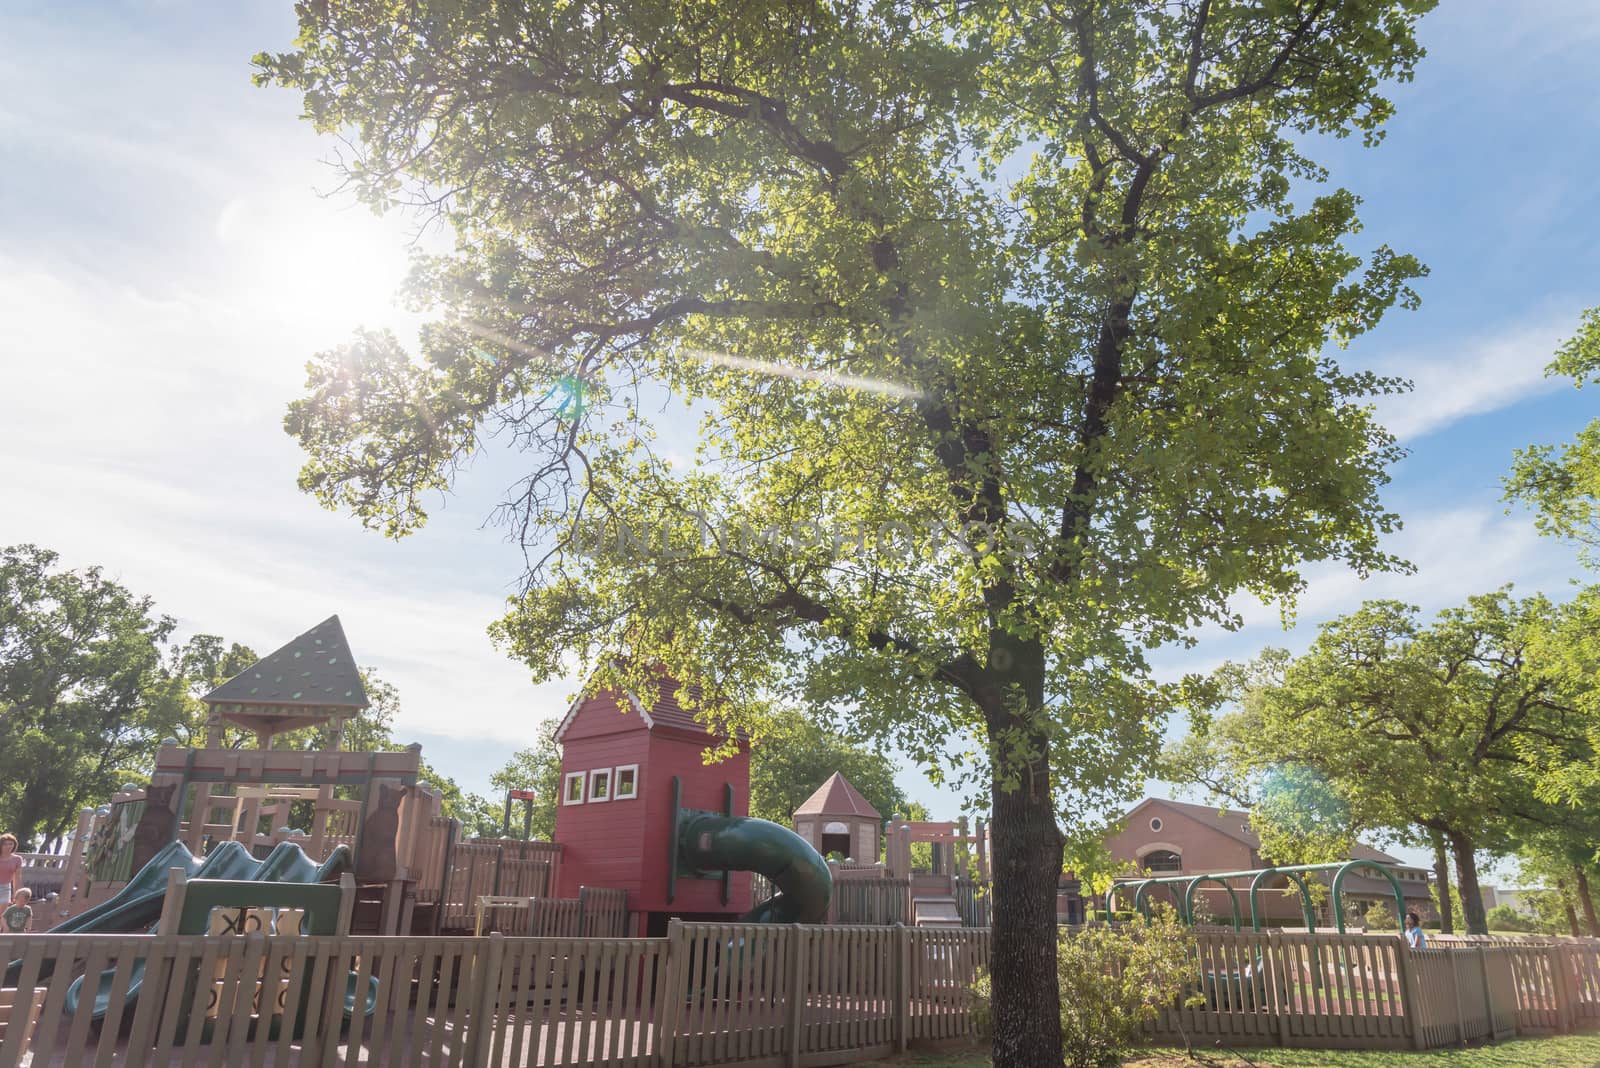 Beautiful wooden playground with fence and big tree at day time near Dallas, Texas, USA